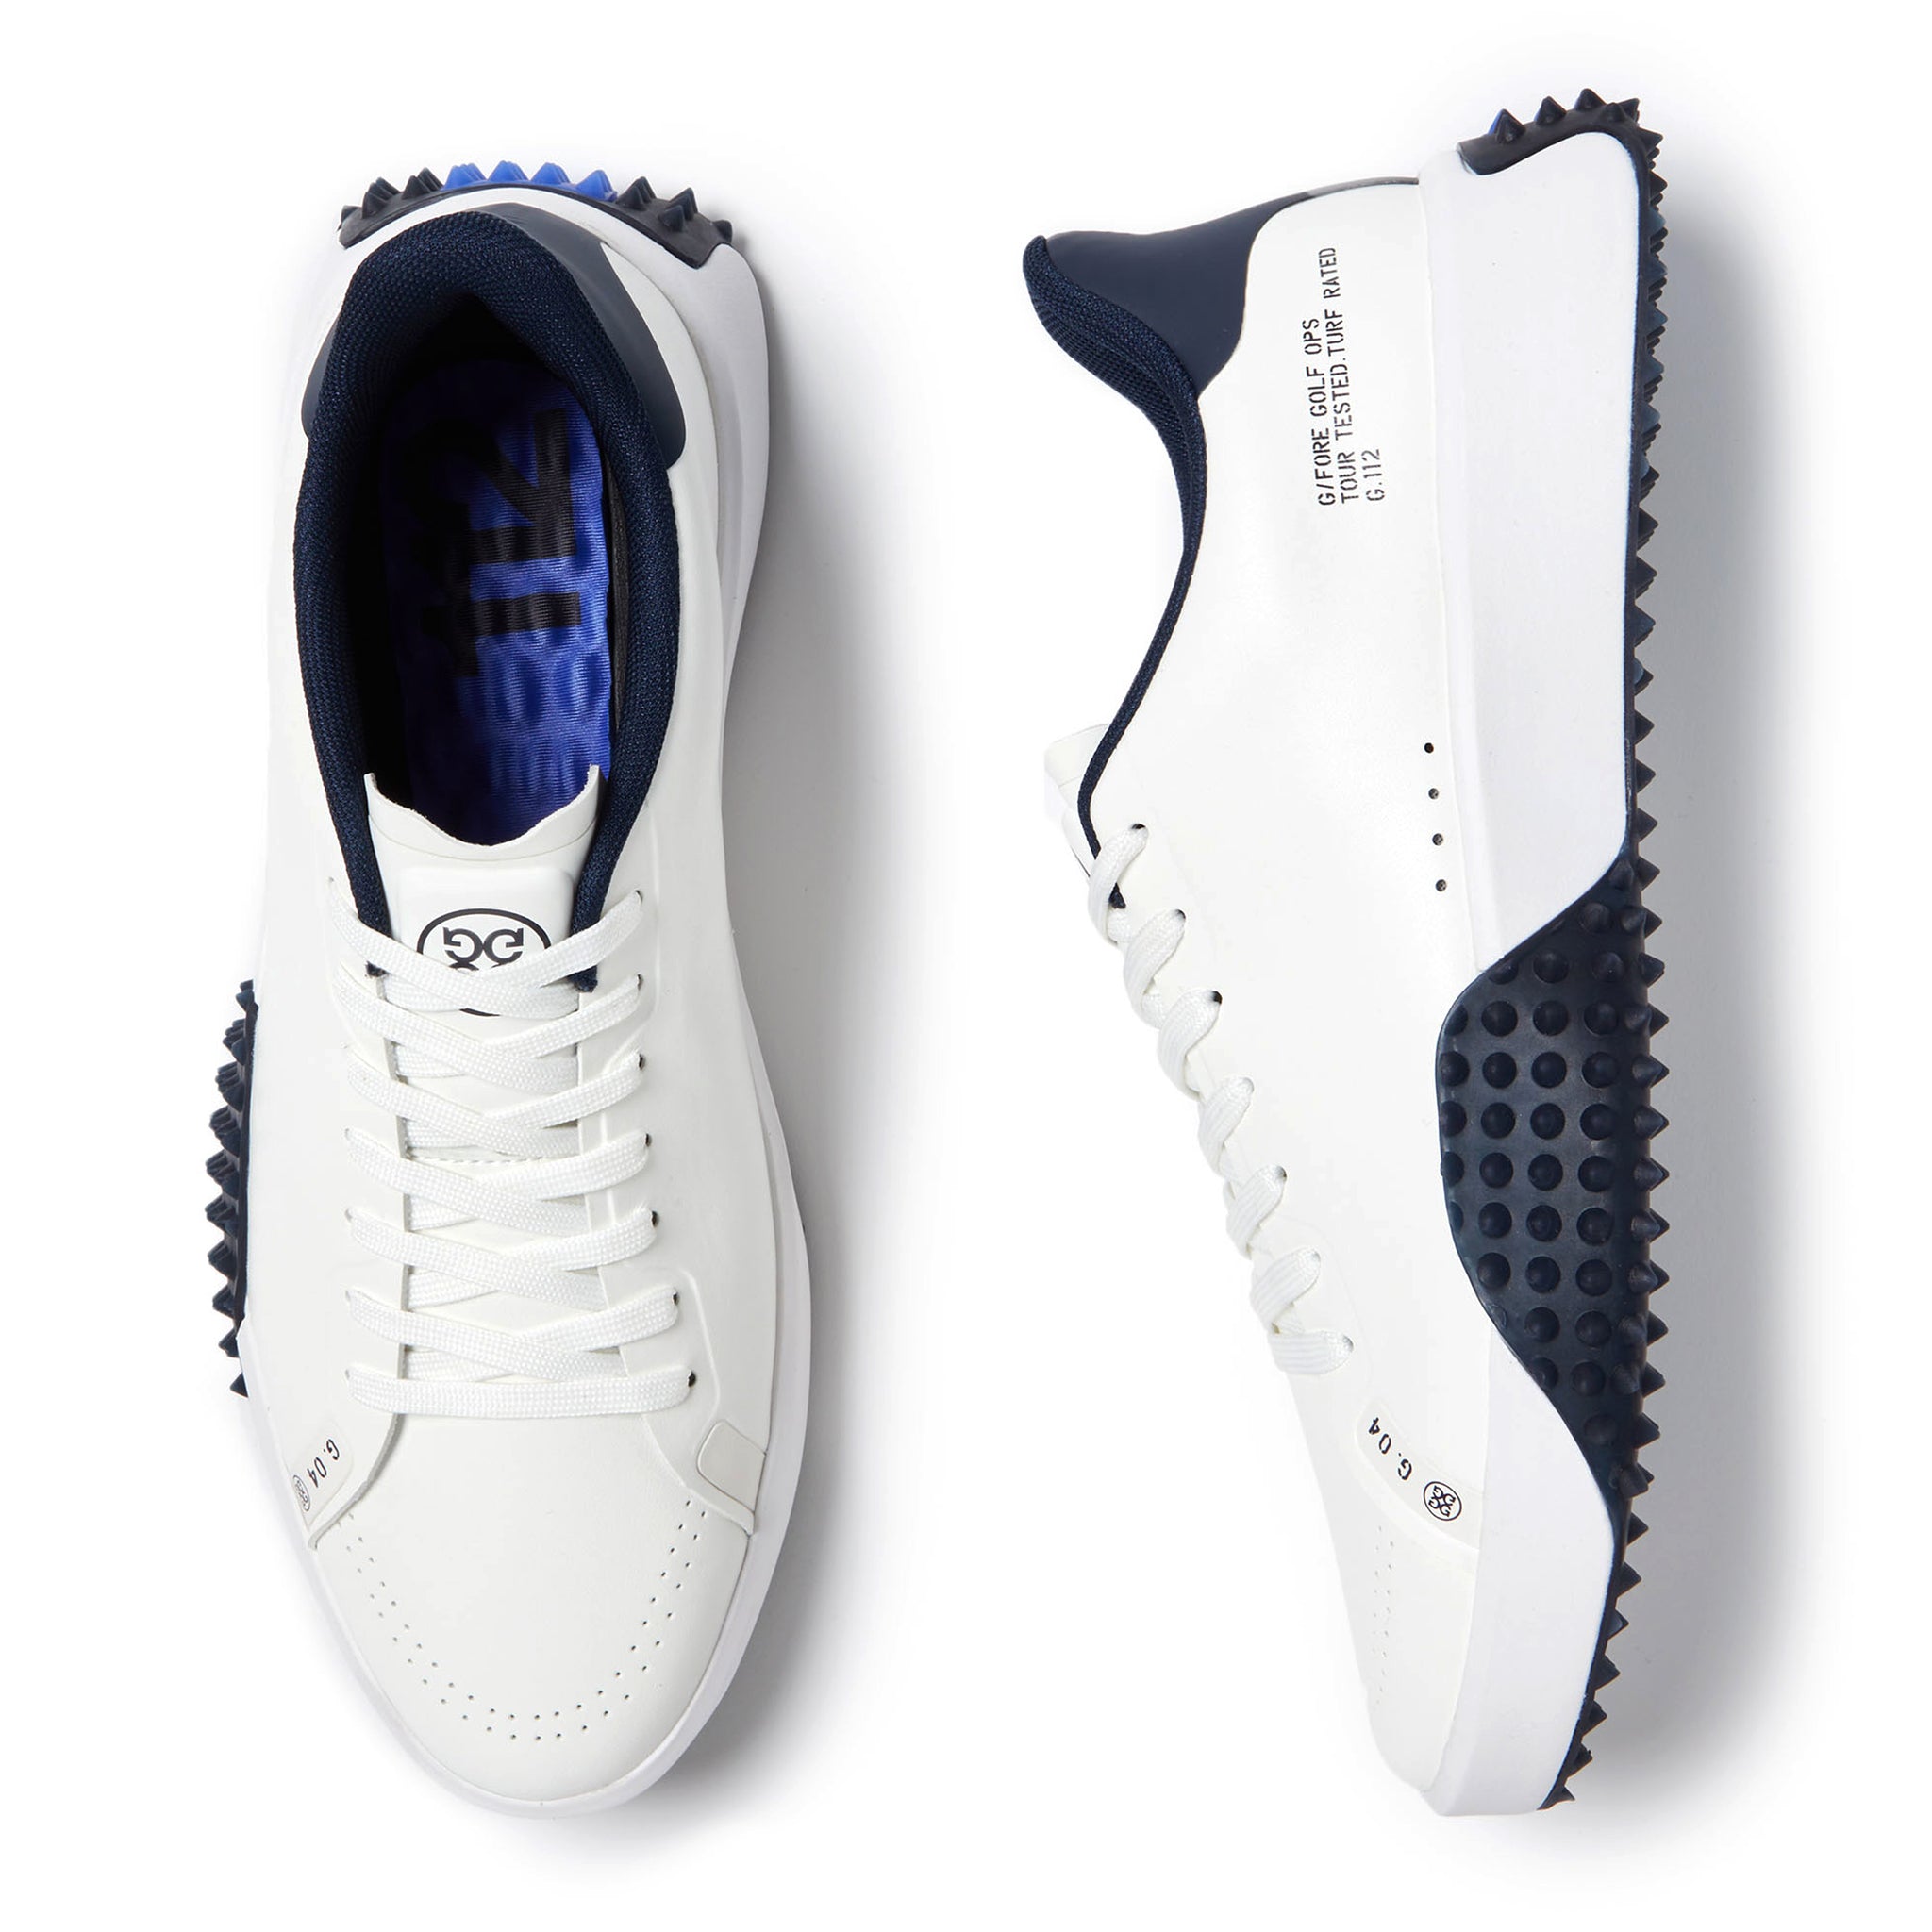 G/FORE G.122 Golf Shoes